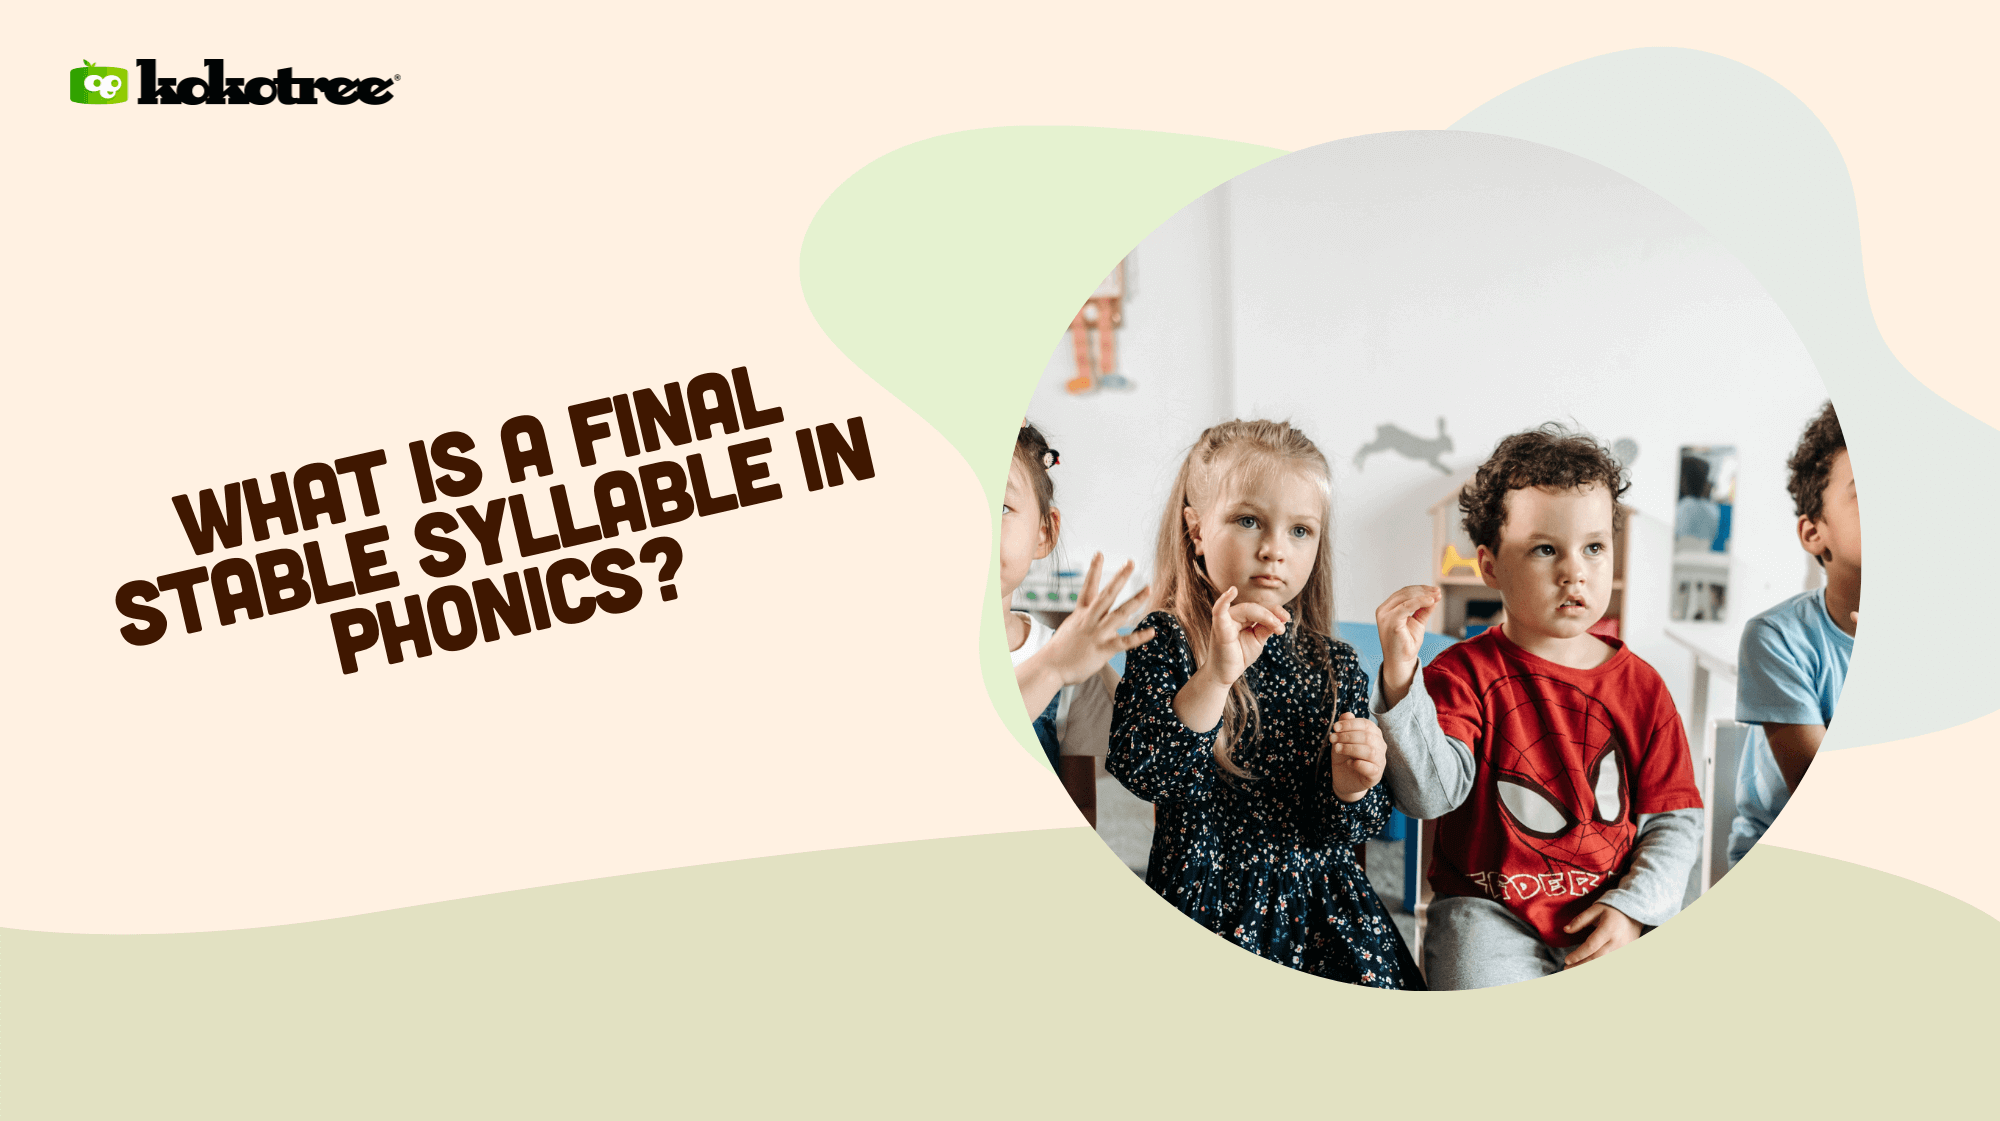 What is a Final Stable Syllable in Phonics? - Kokotree